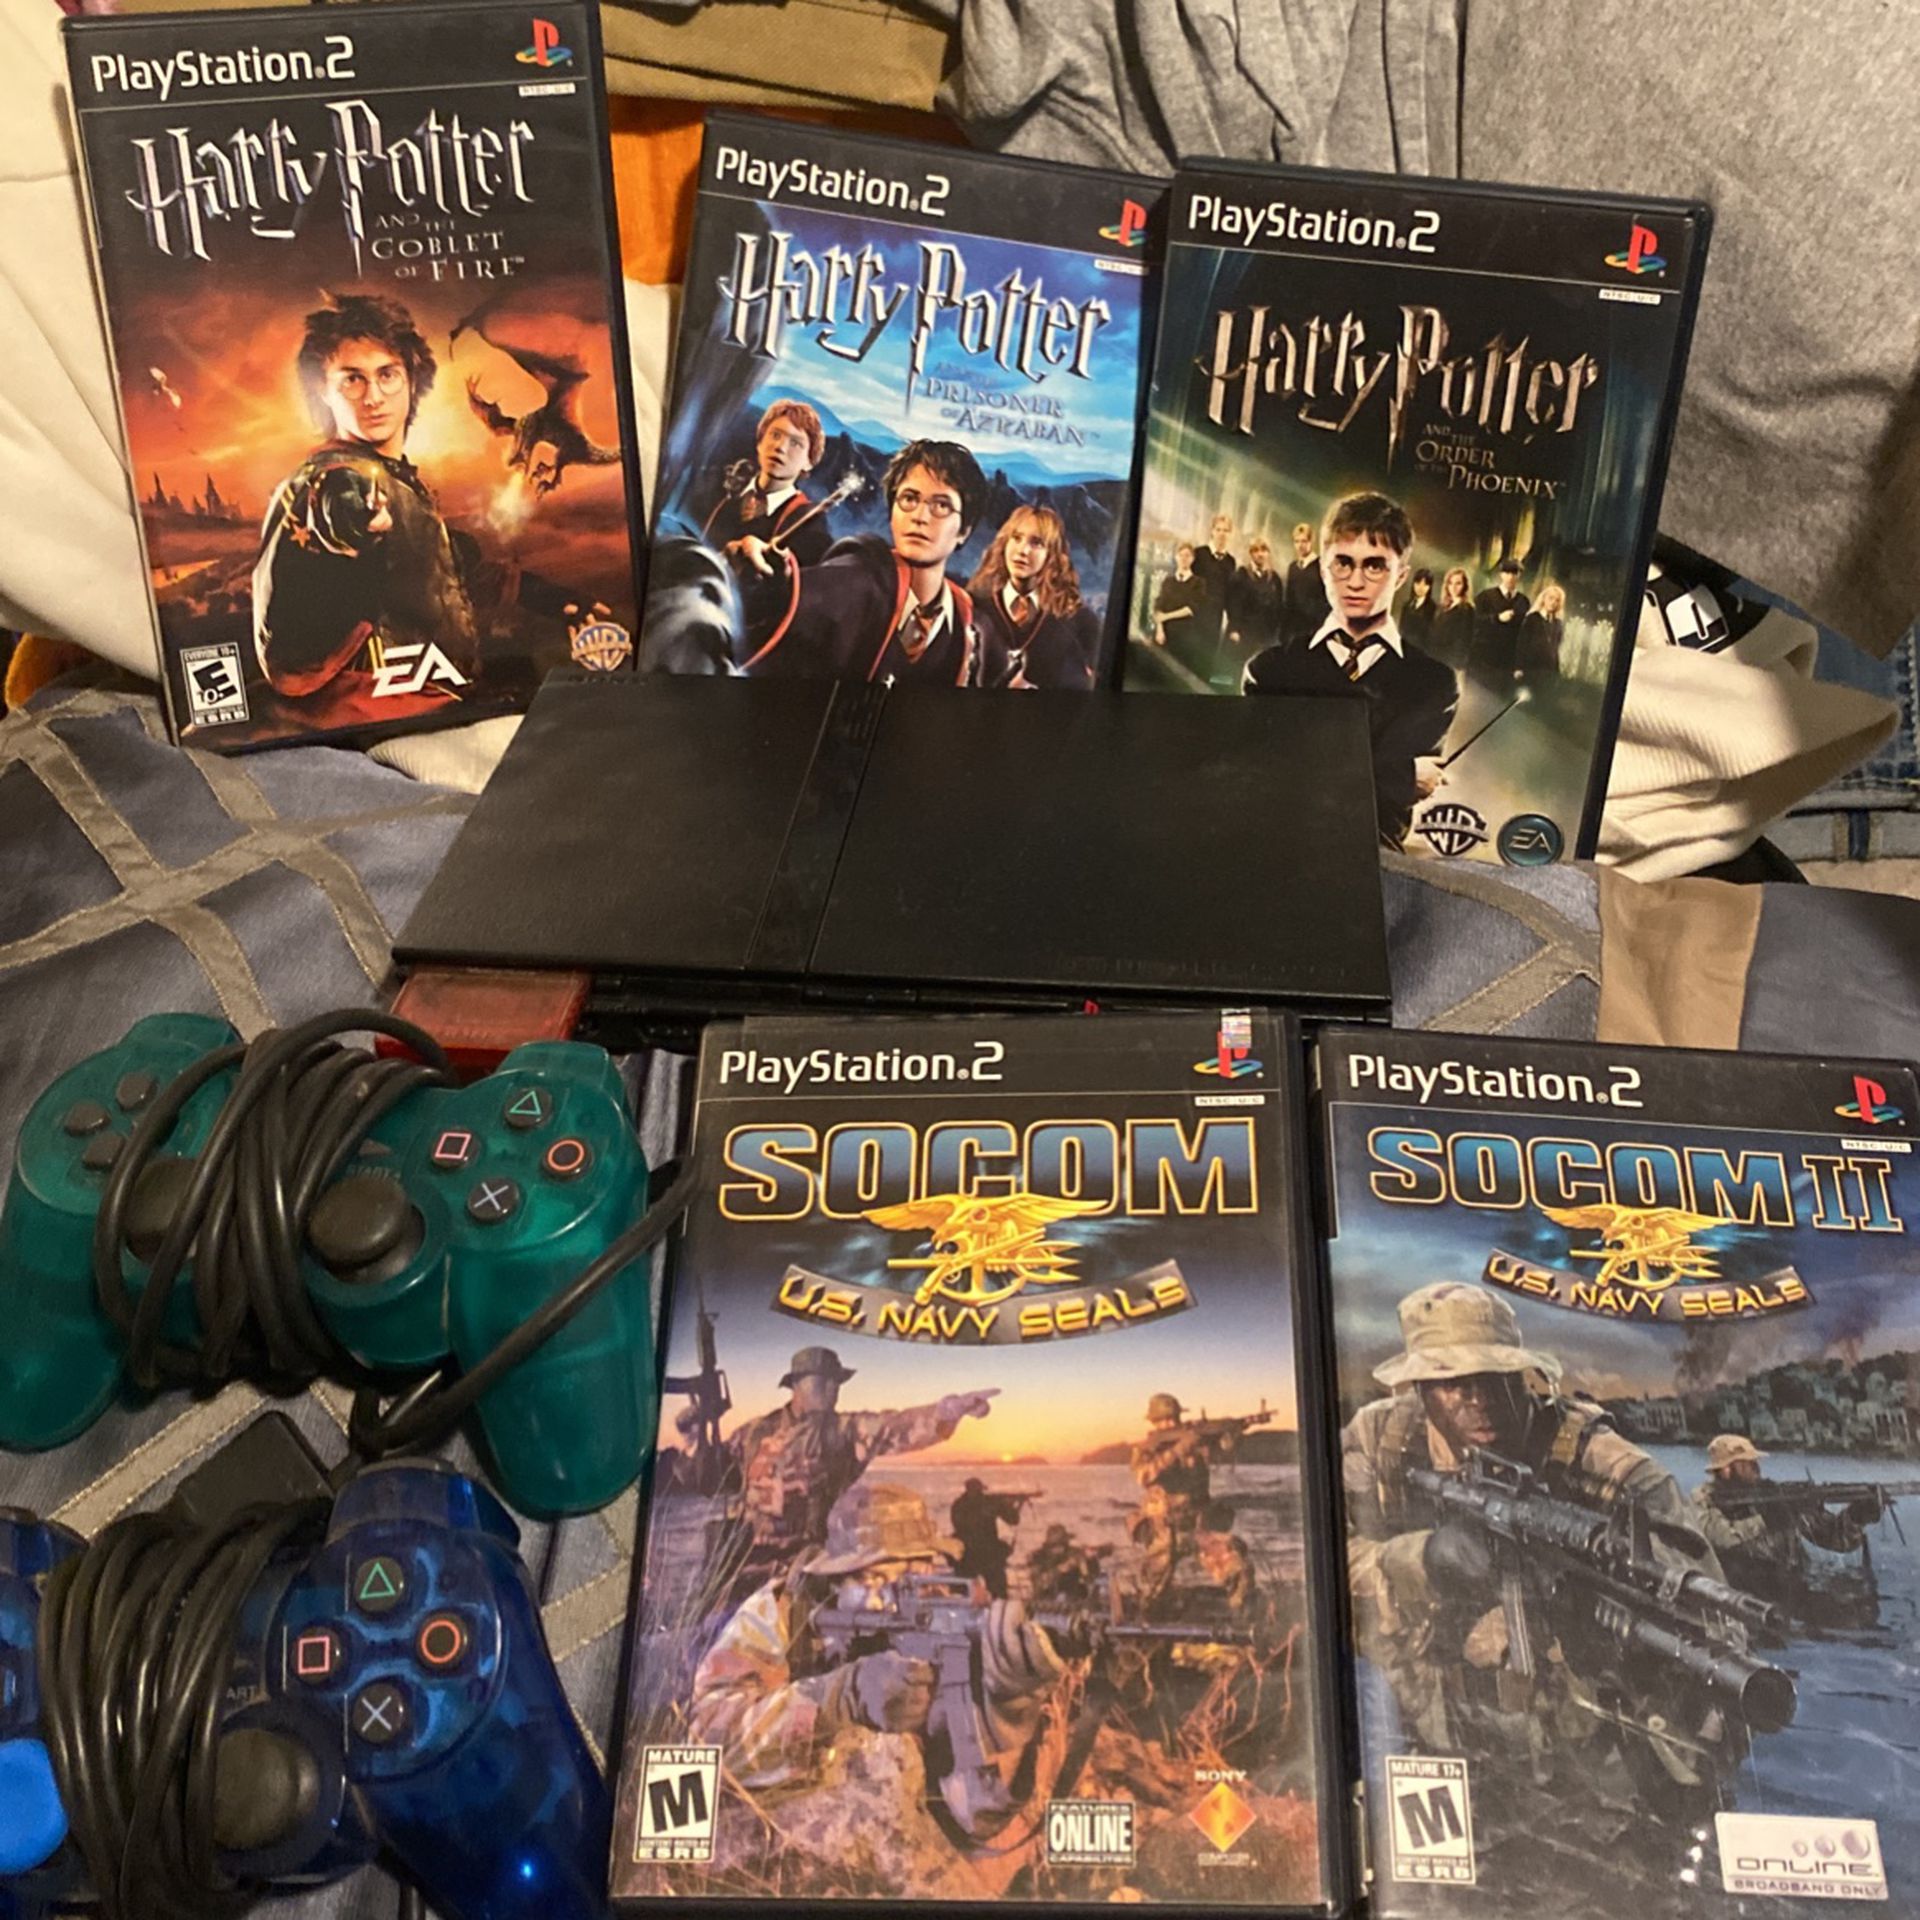 PlayStation 2 Harry Potter Games And Socom Games 